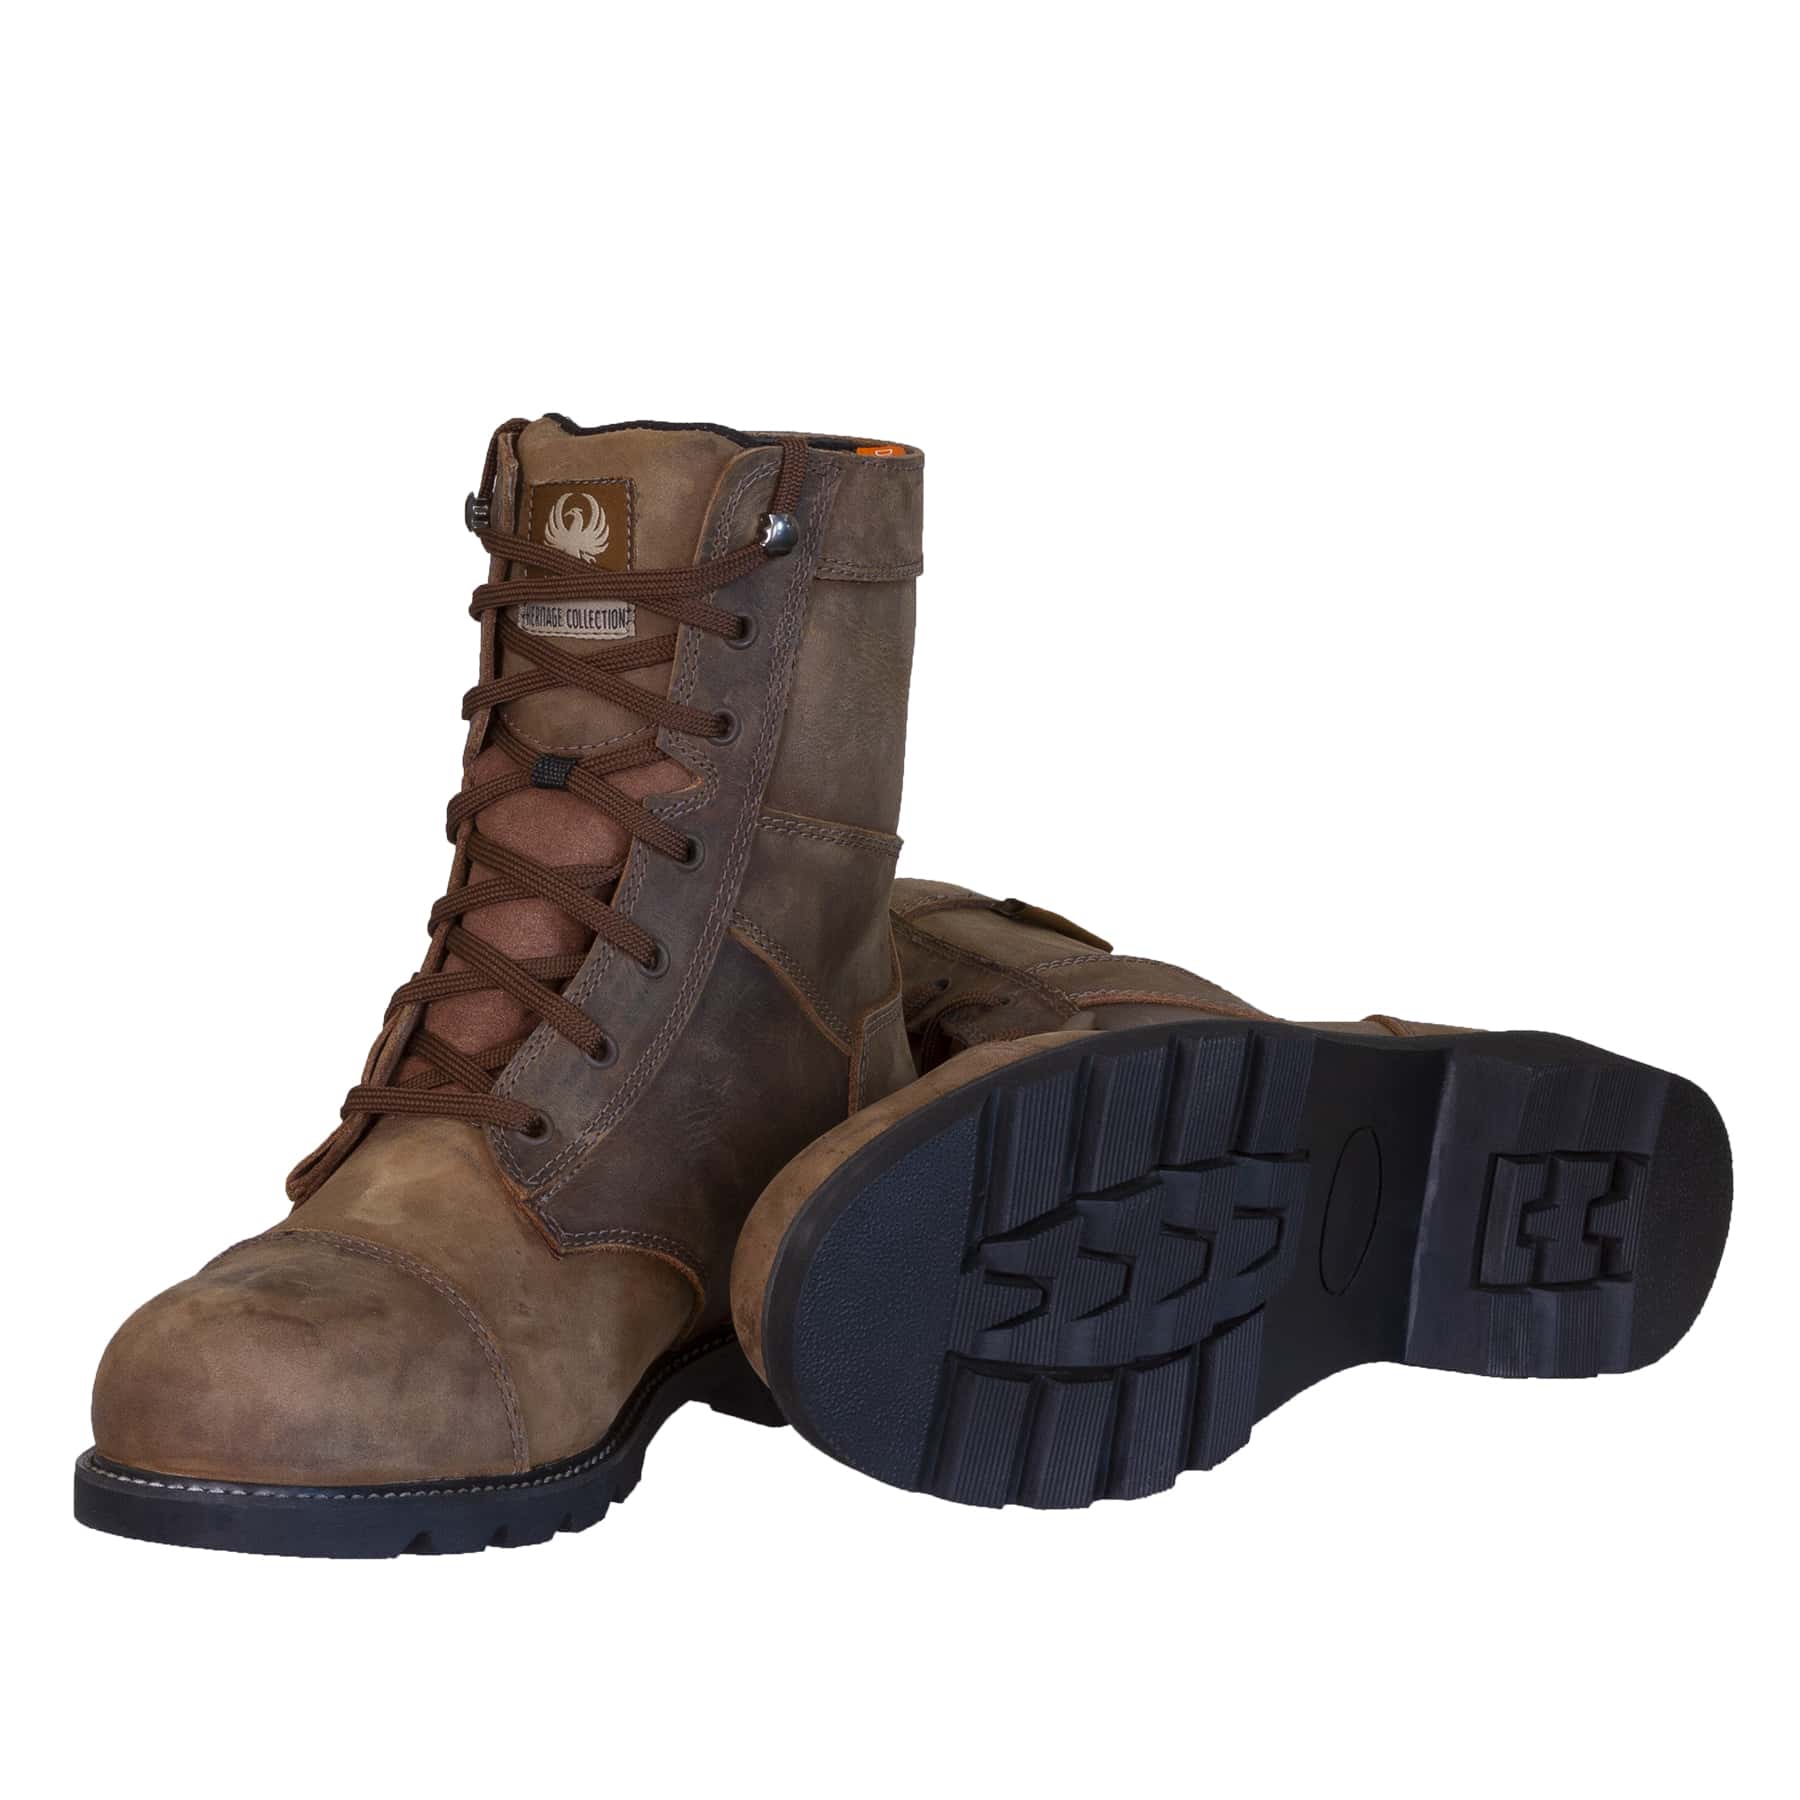 Merlin Gobi Motorcycle Boots - Nubuck Leather With Toe, Heel, and Ankle  Protection Built In